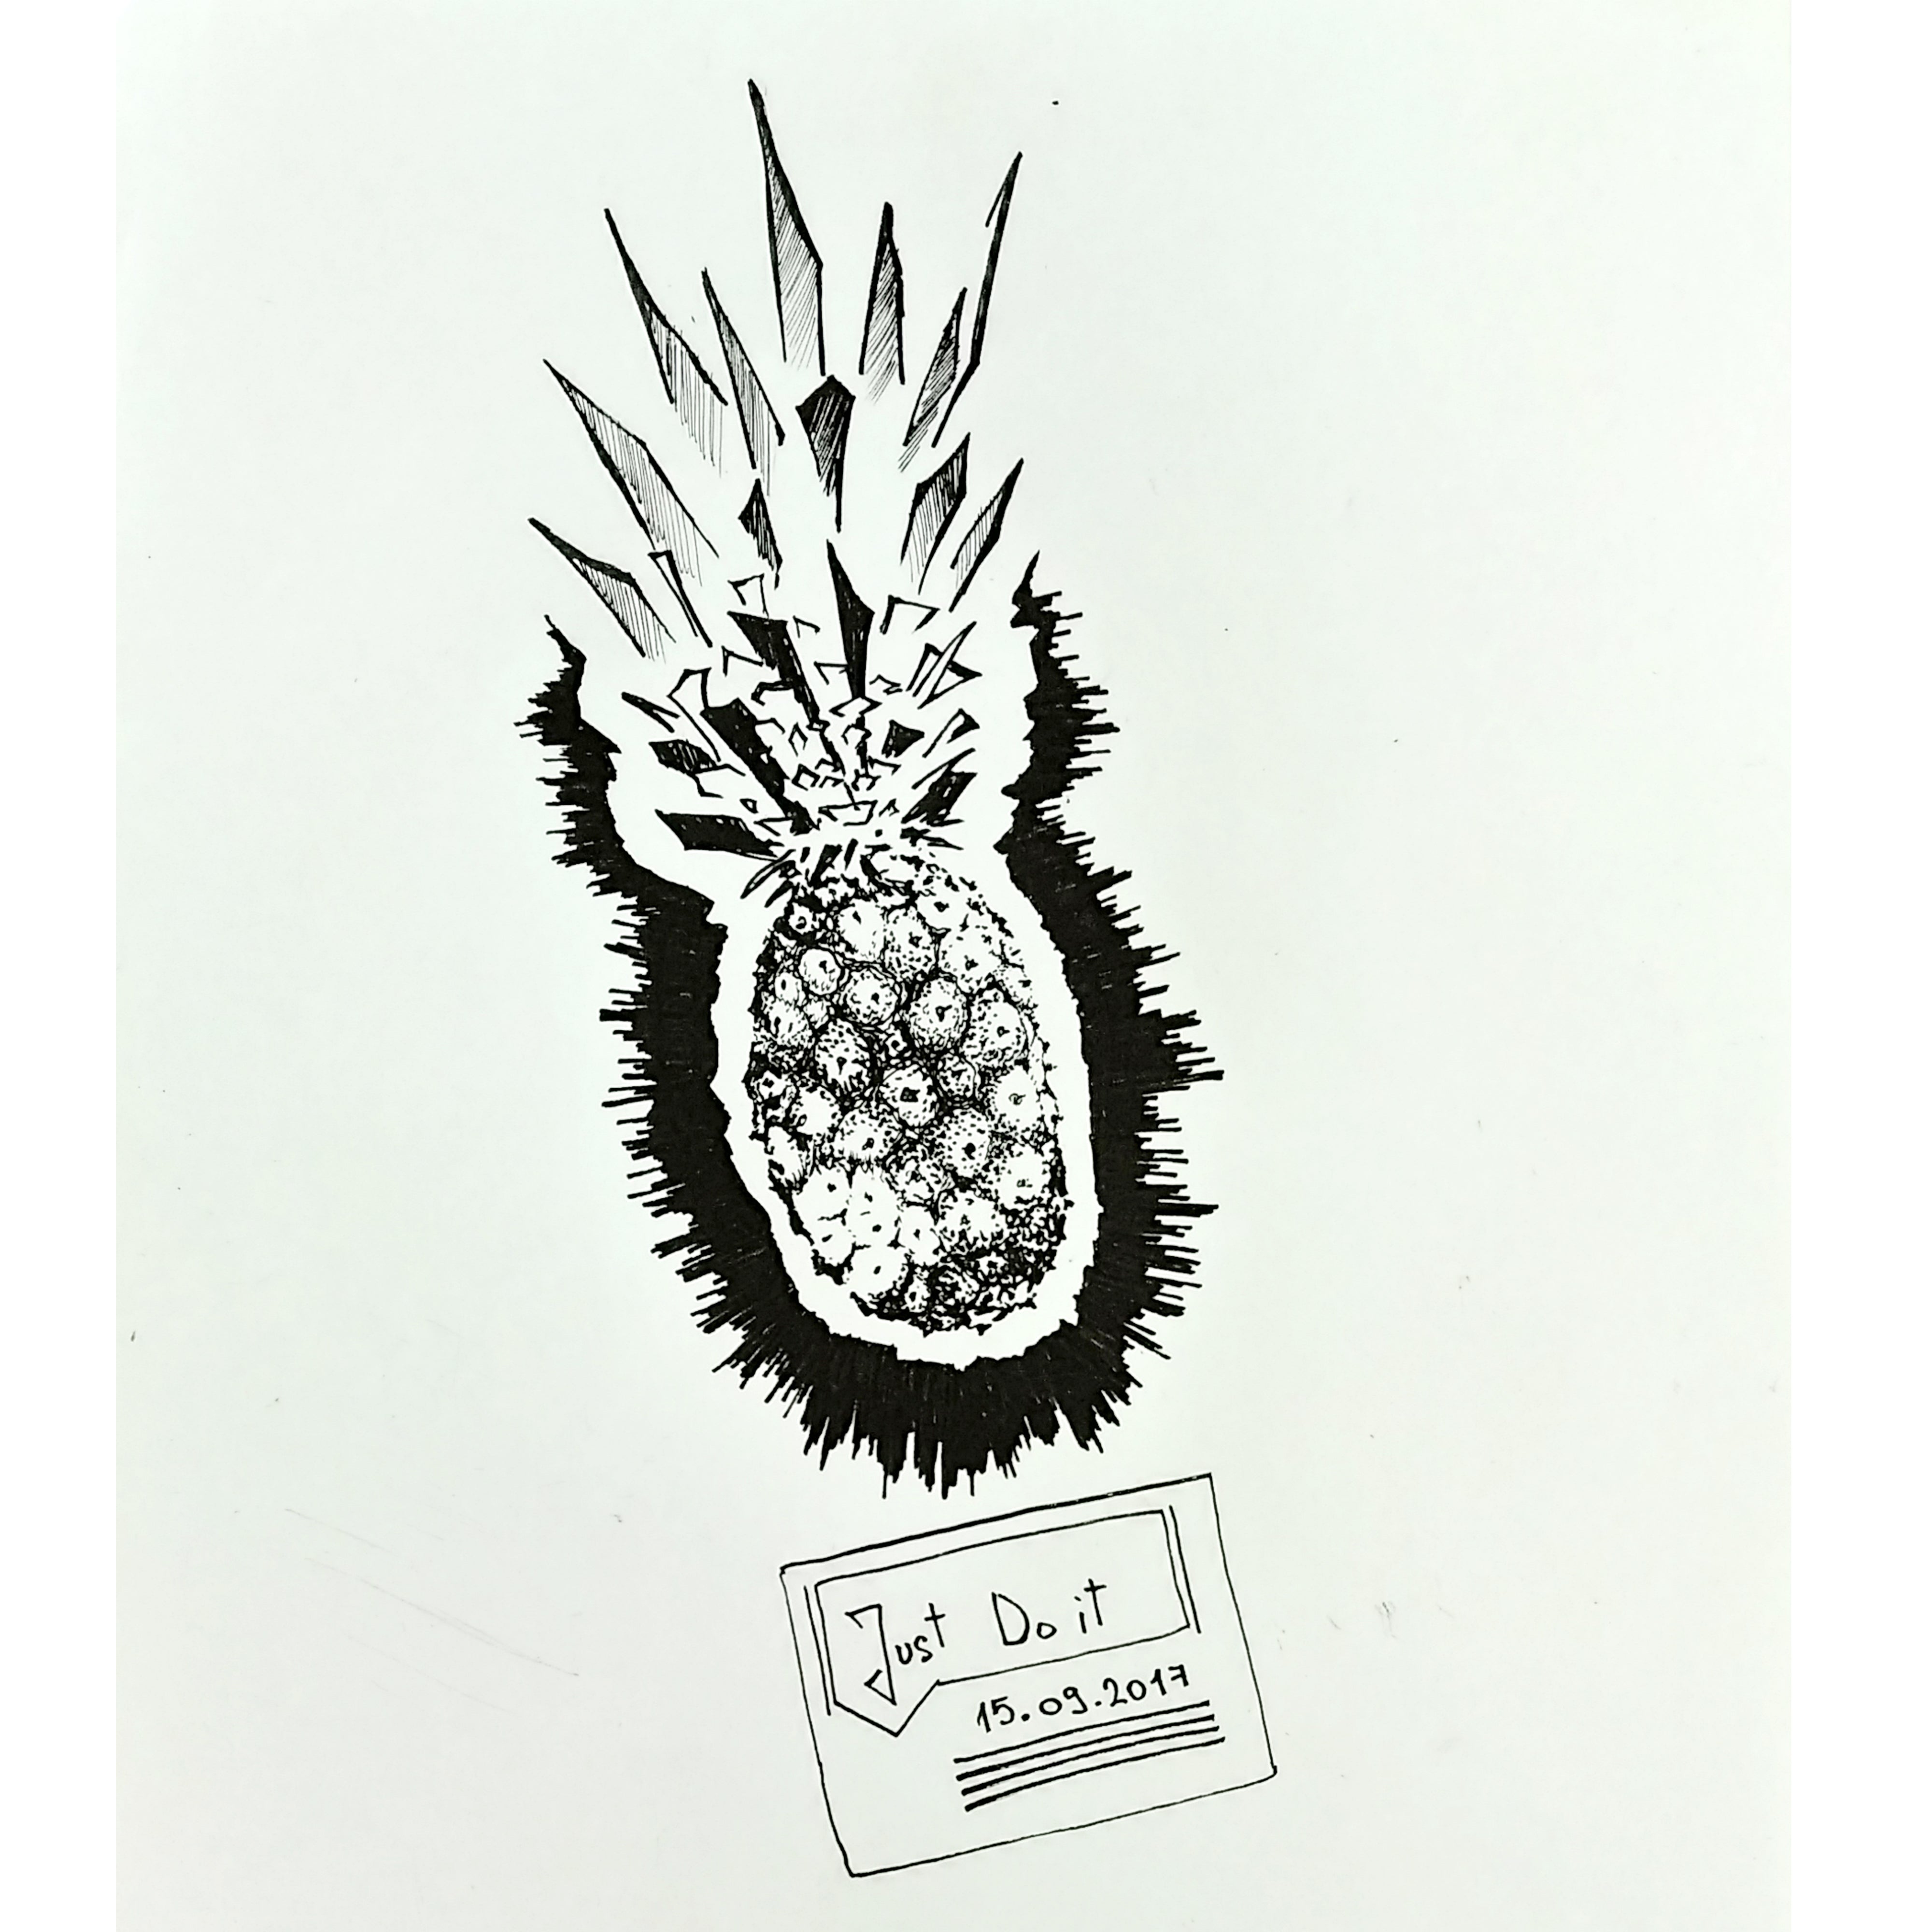 Pineapple No9 - "Just do it"